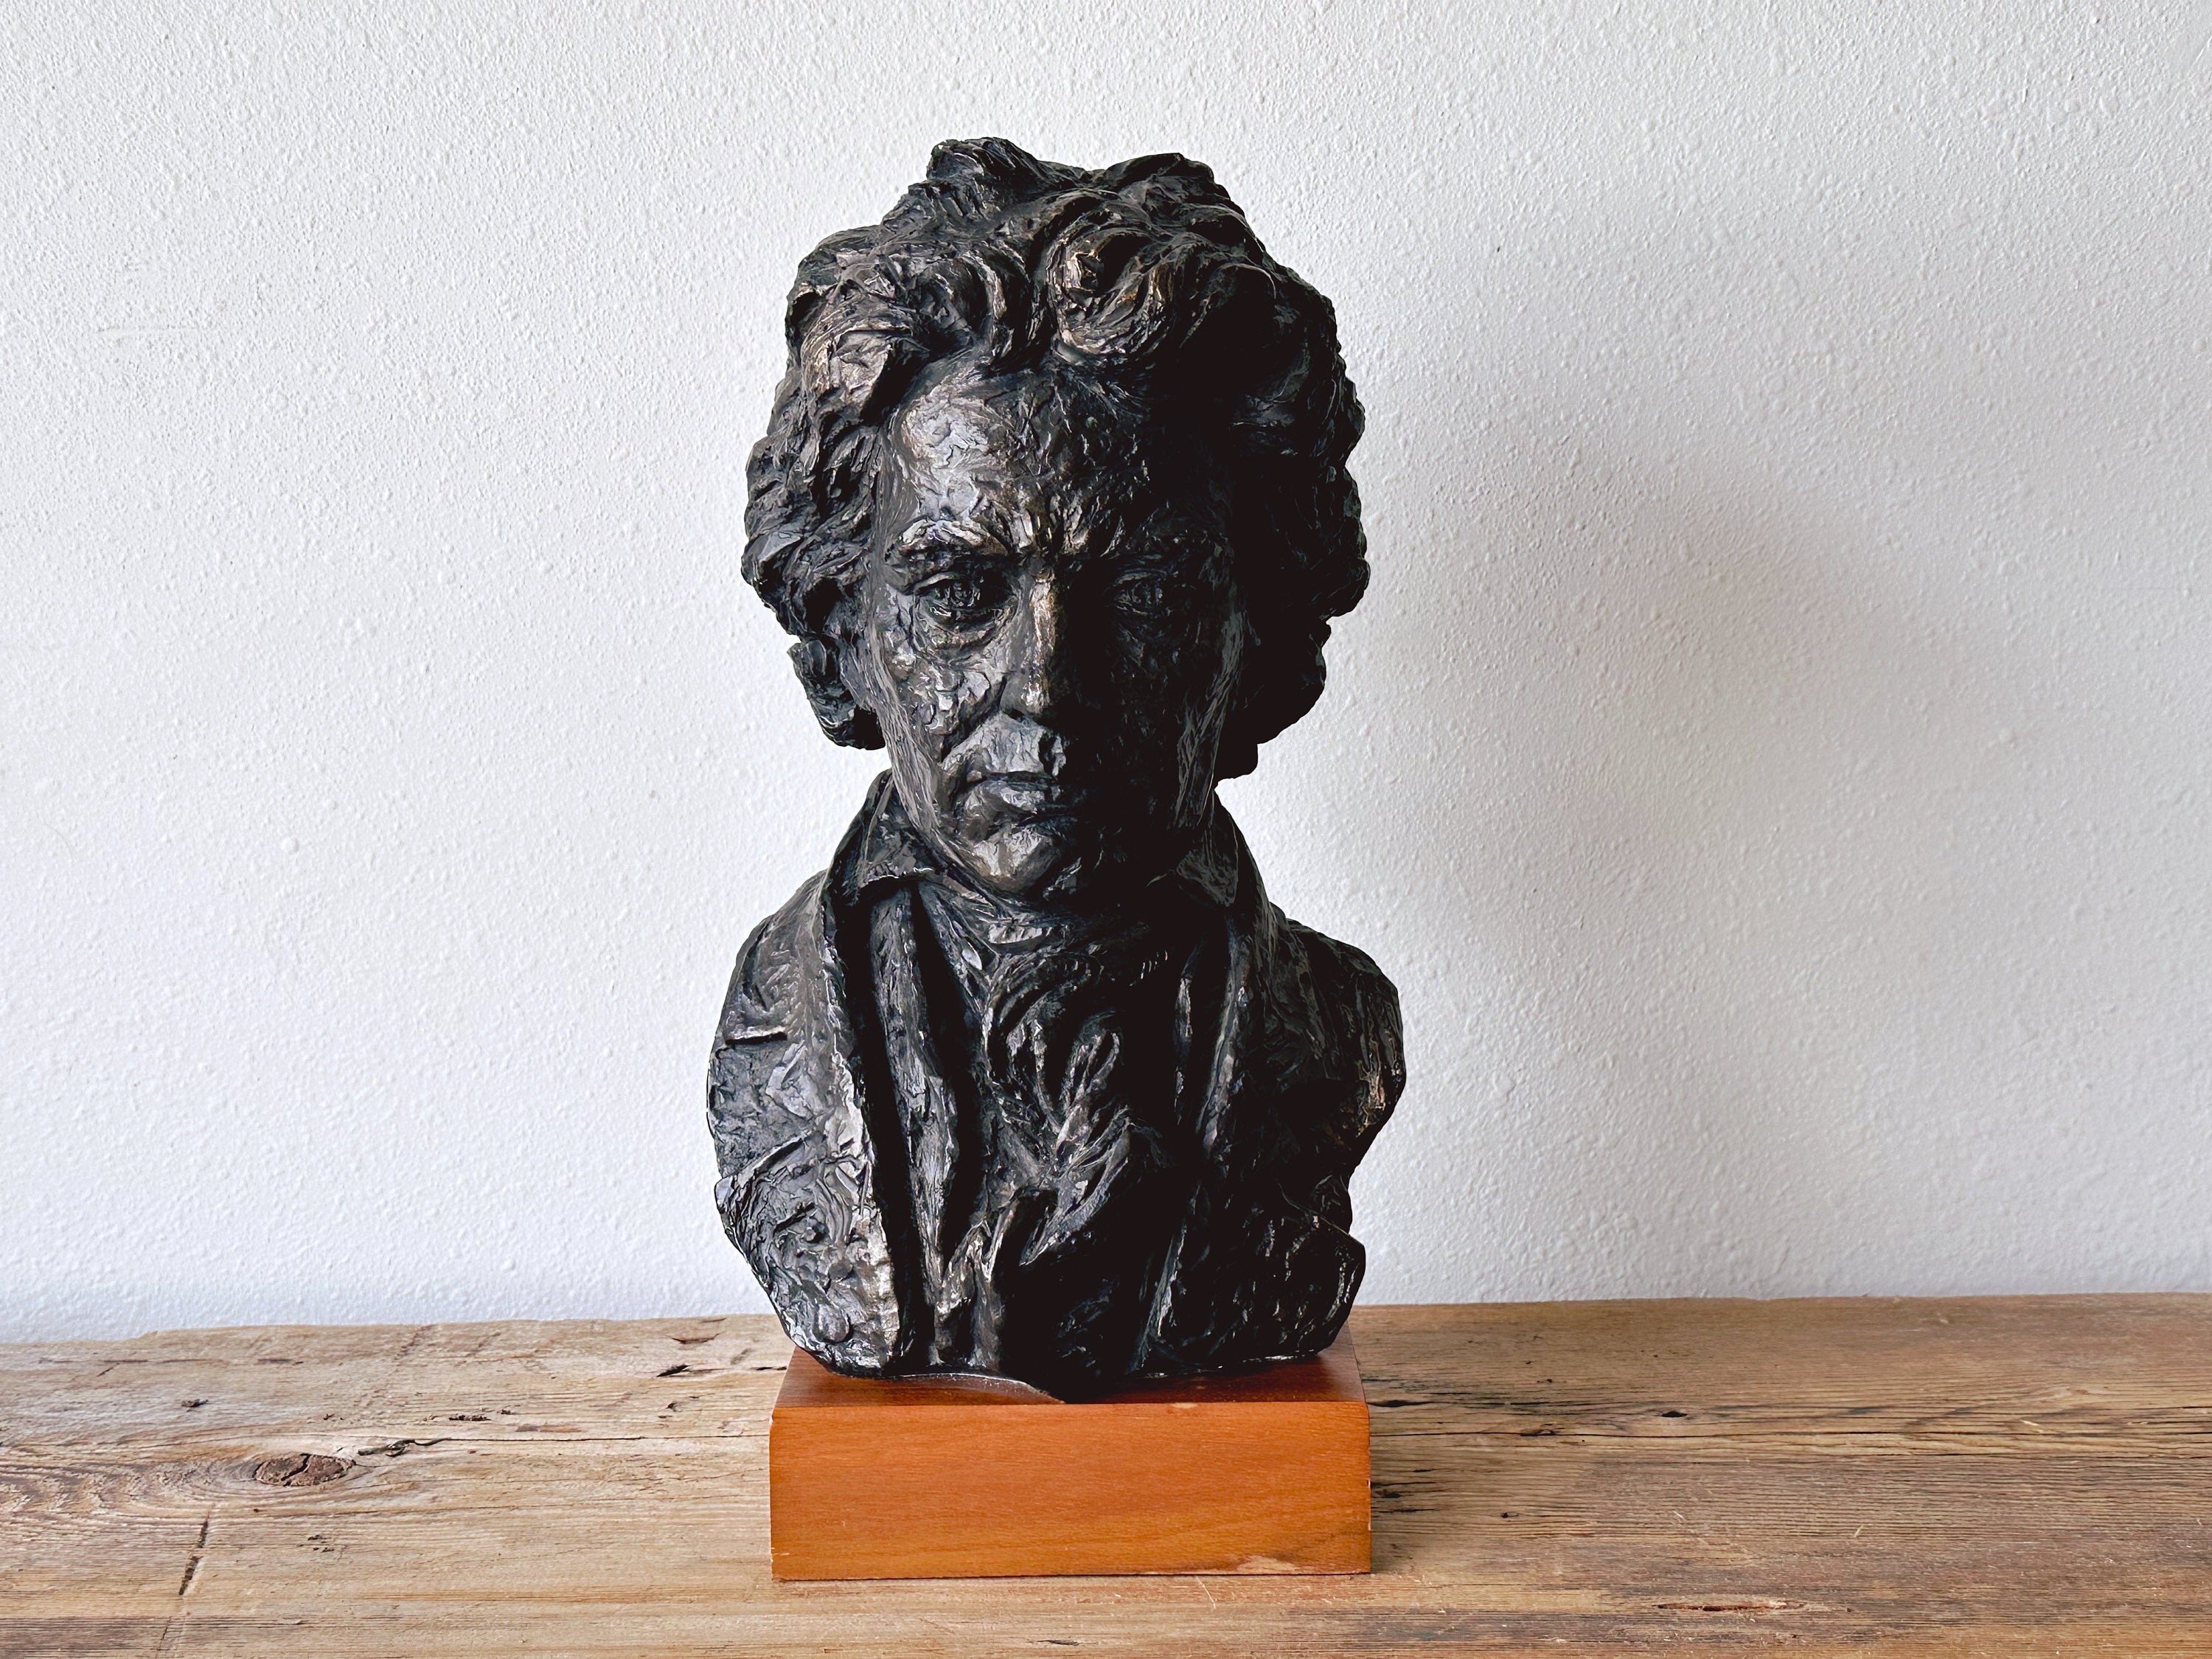 Vintage 1961 Bust of Beethoven Sculpture on Wood Pedestal Stand by